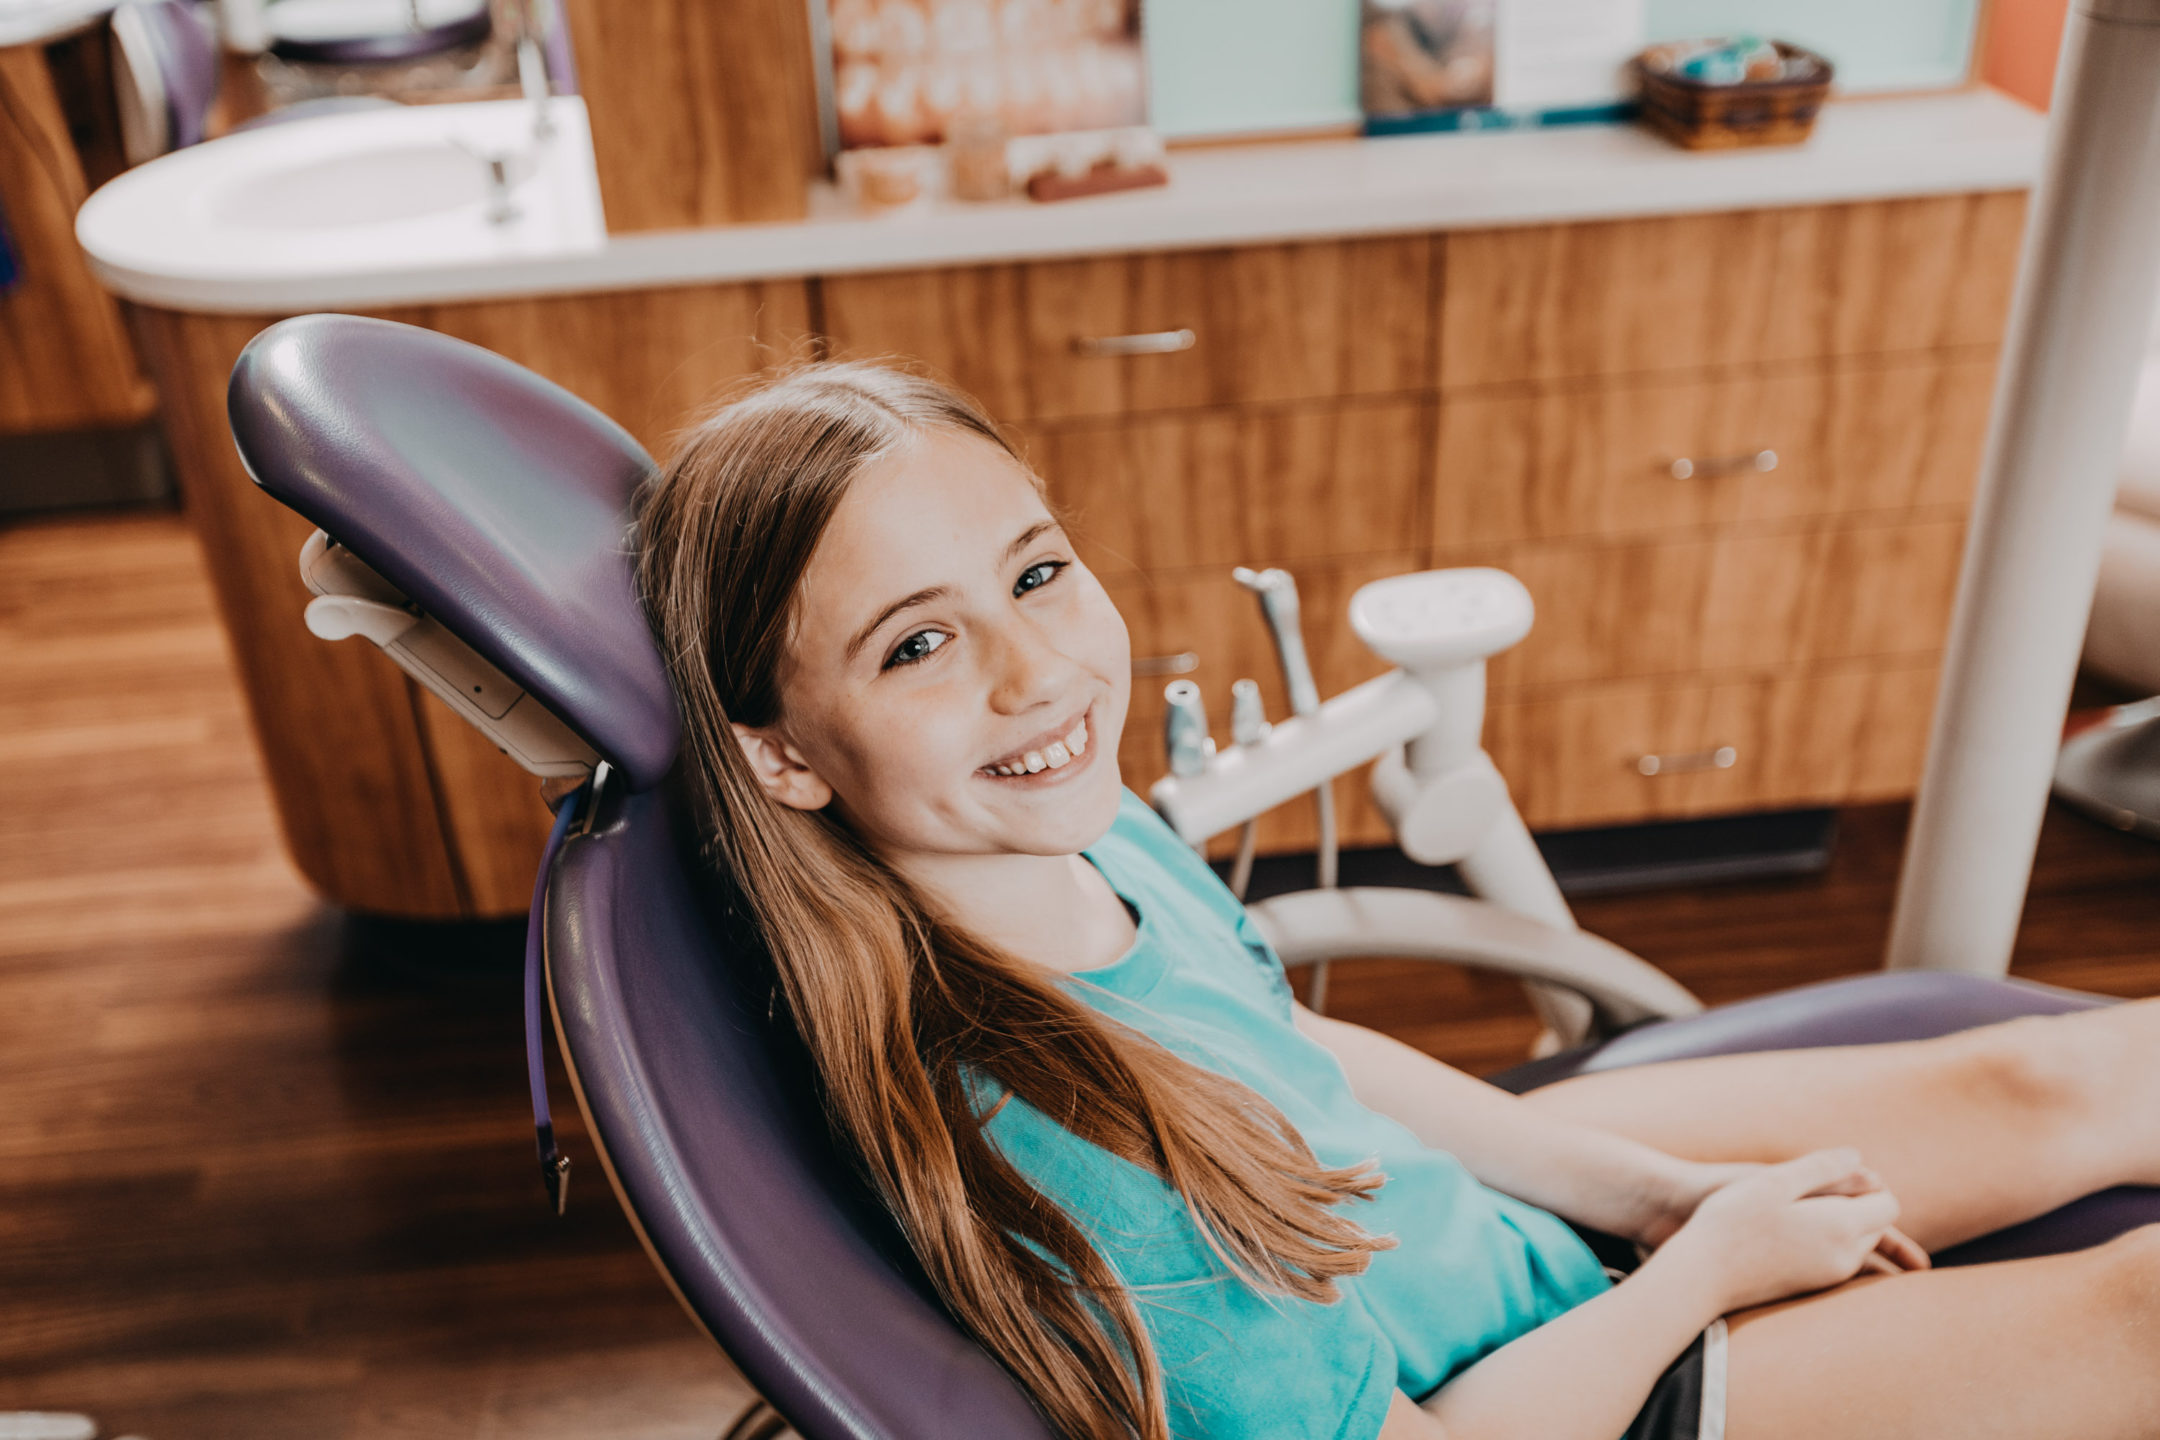 Smiling young girl sits in a dentist chair and looks at camera in a wram, wooden dentist office